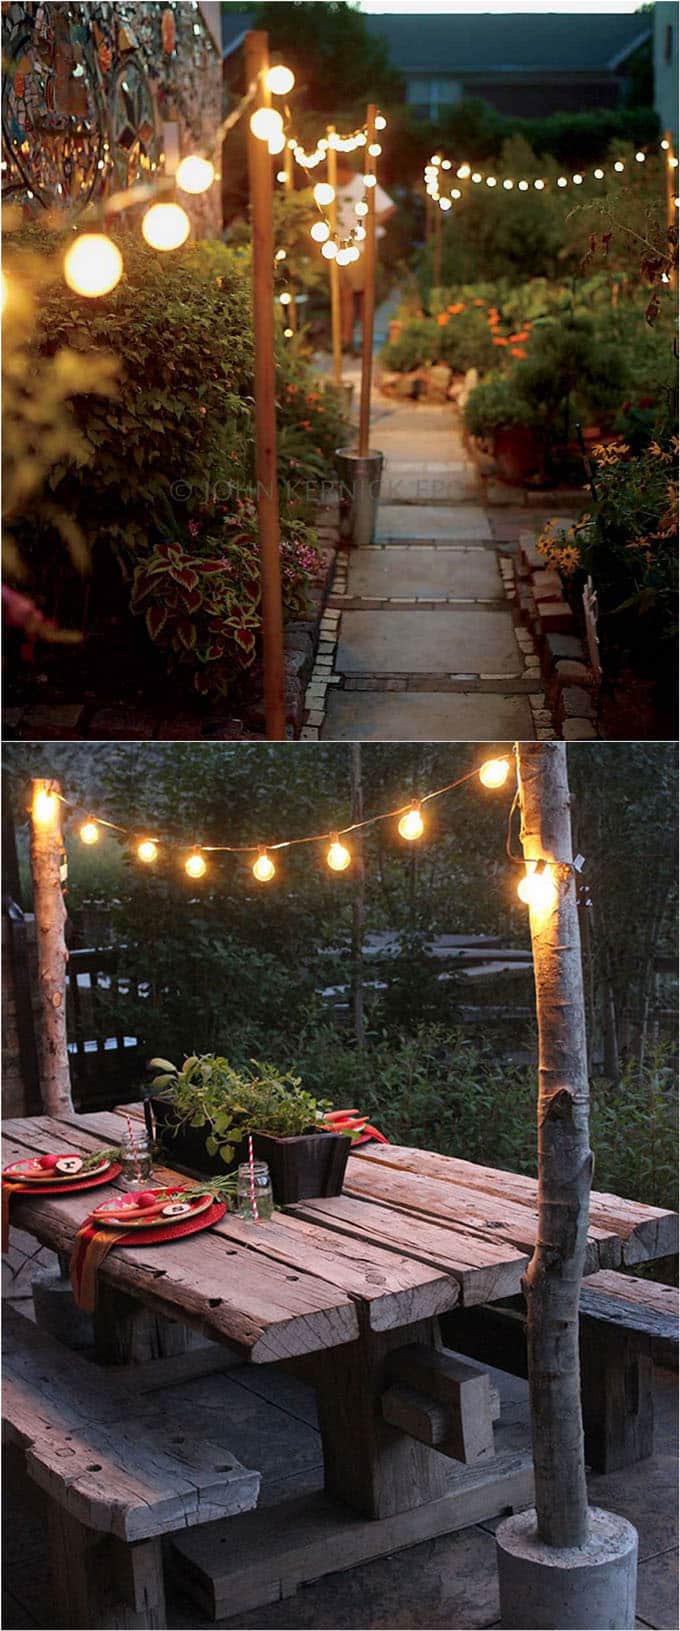 Amazing collection of 28 stunning yet easy DIY outdoor lights! Most can be made in 1 hour, with up-cycled or common materials. So creative and beautiful! - A Piece Of Rainbow